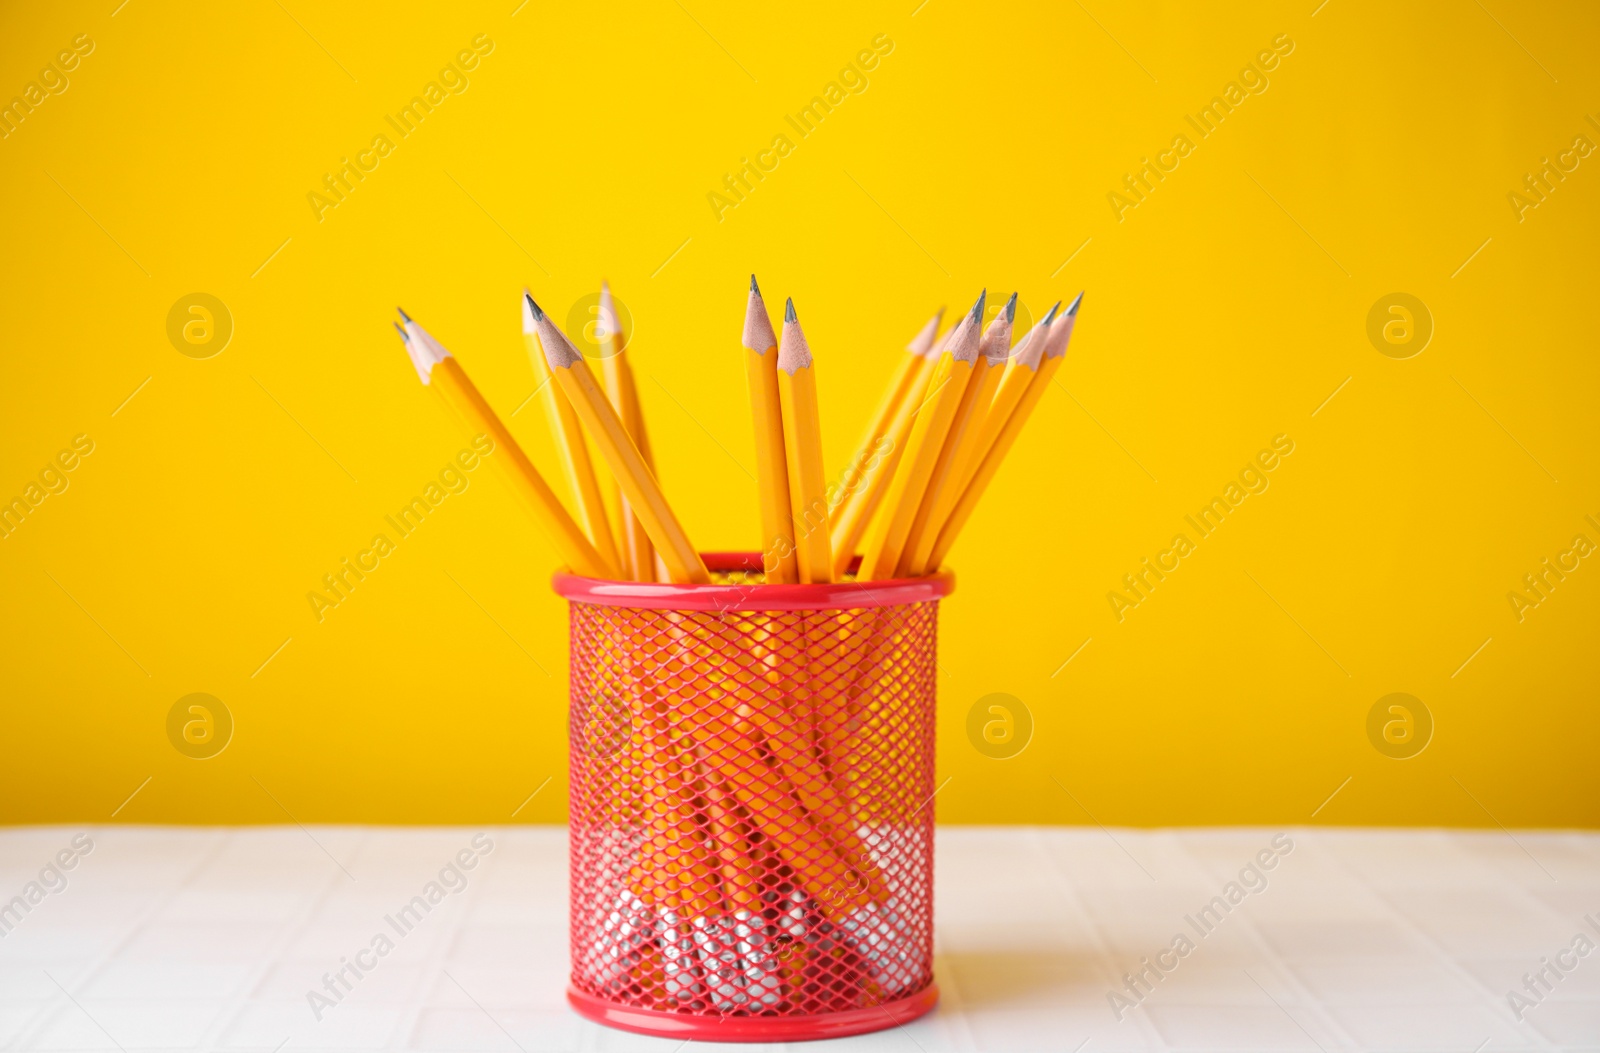 Photo of Many sharp pencils in holder on light table against yellow background